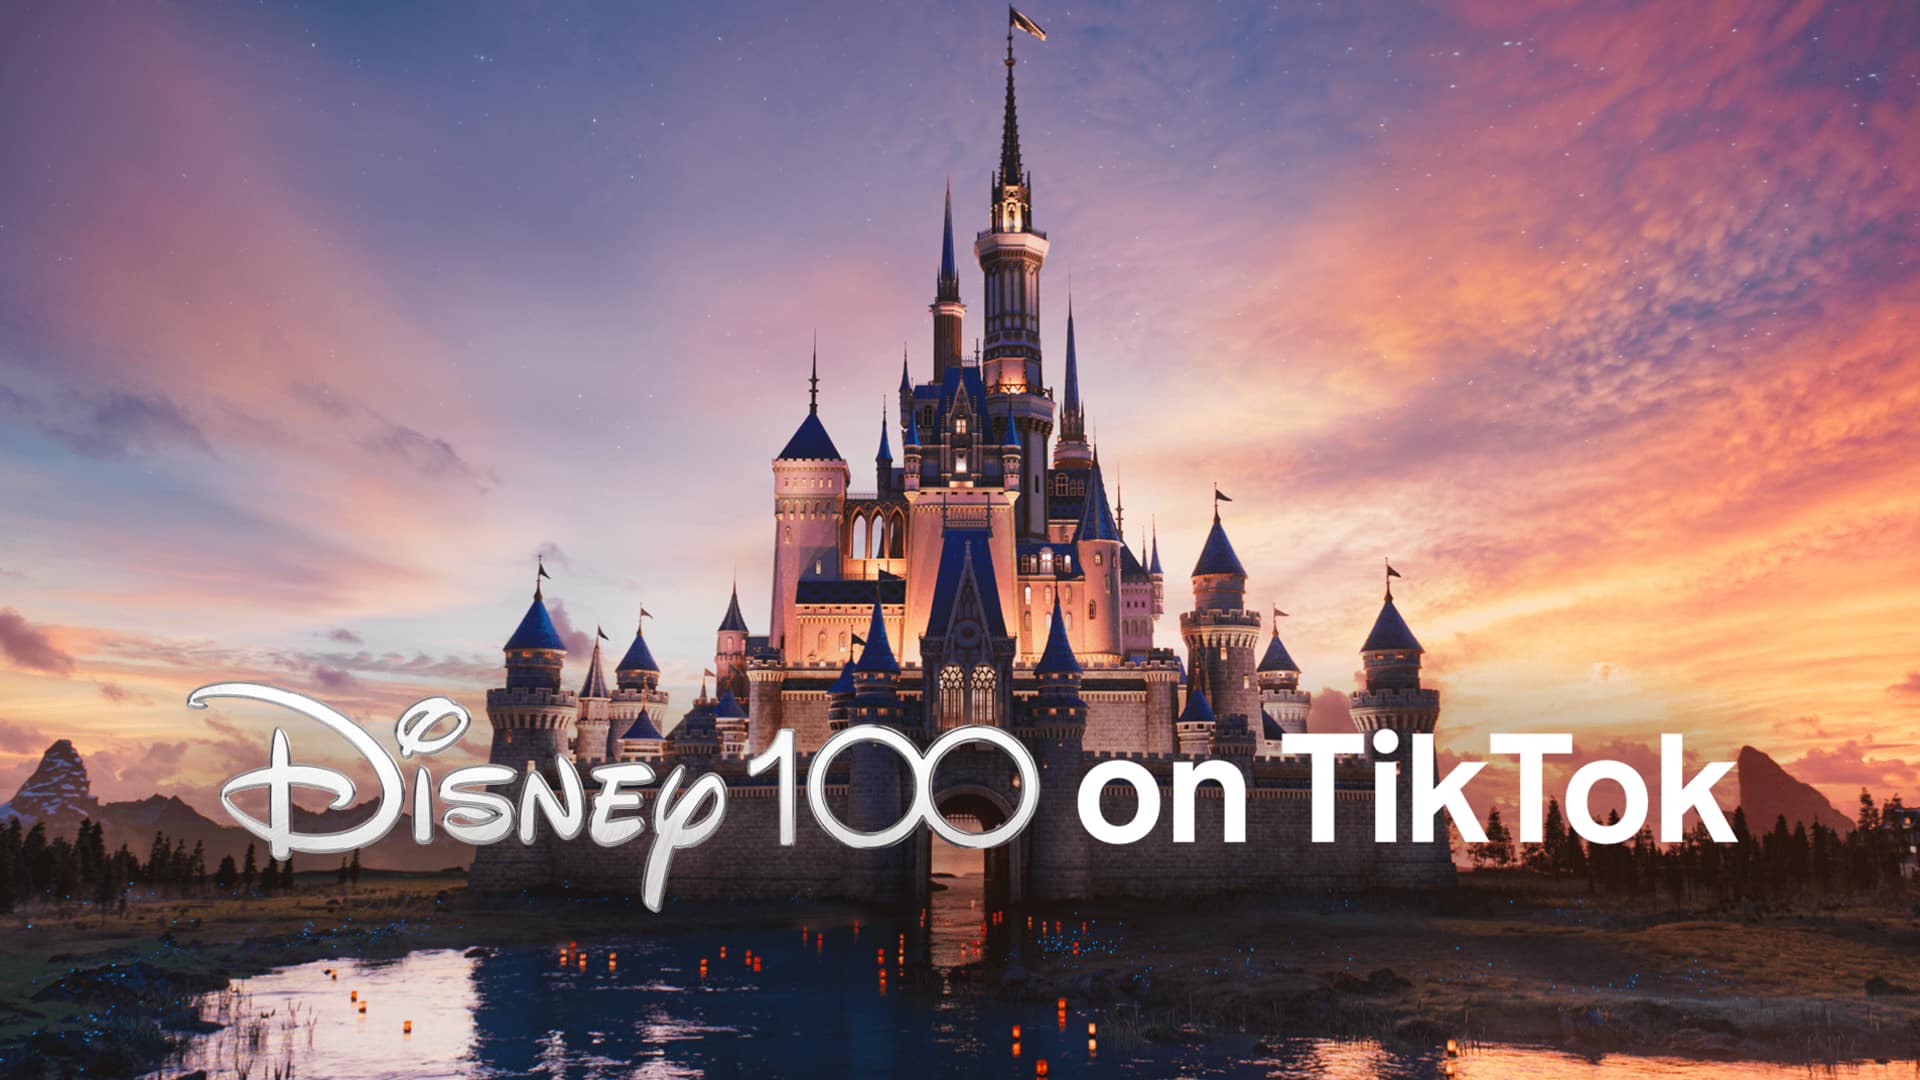 TikTok partners with Disney for content hub, publisher collaboration